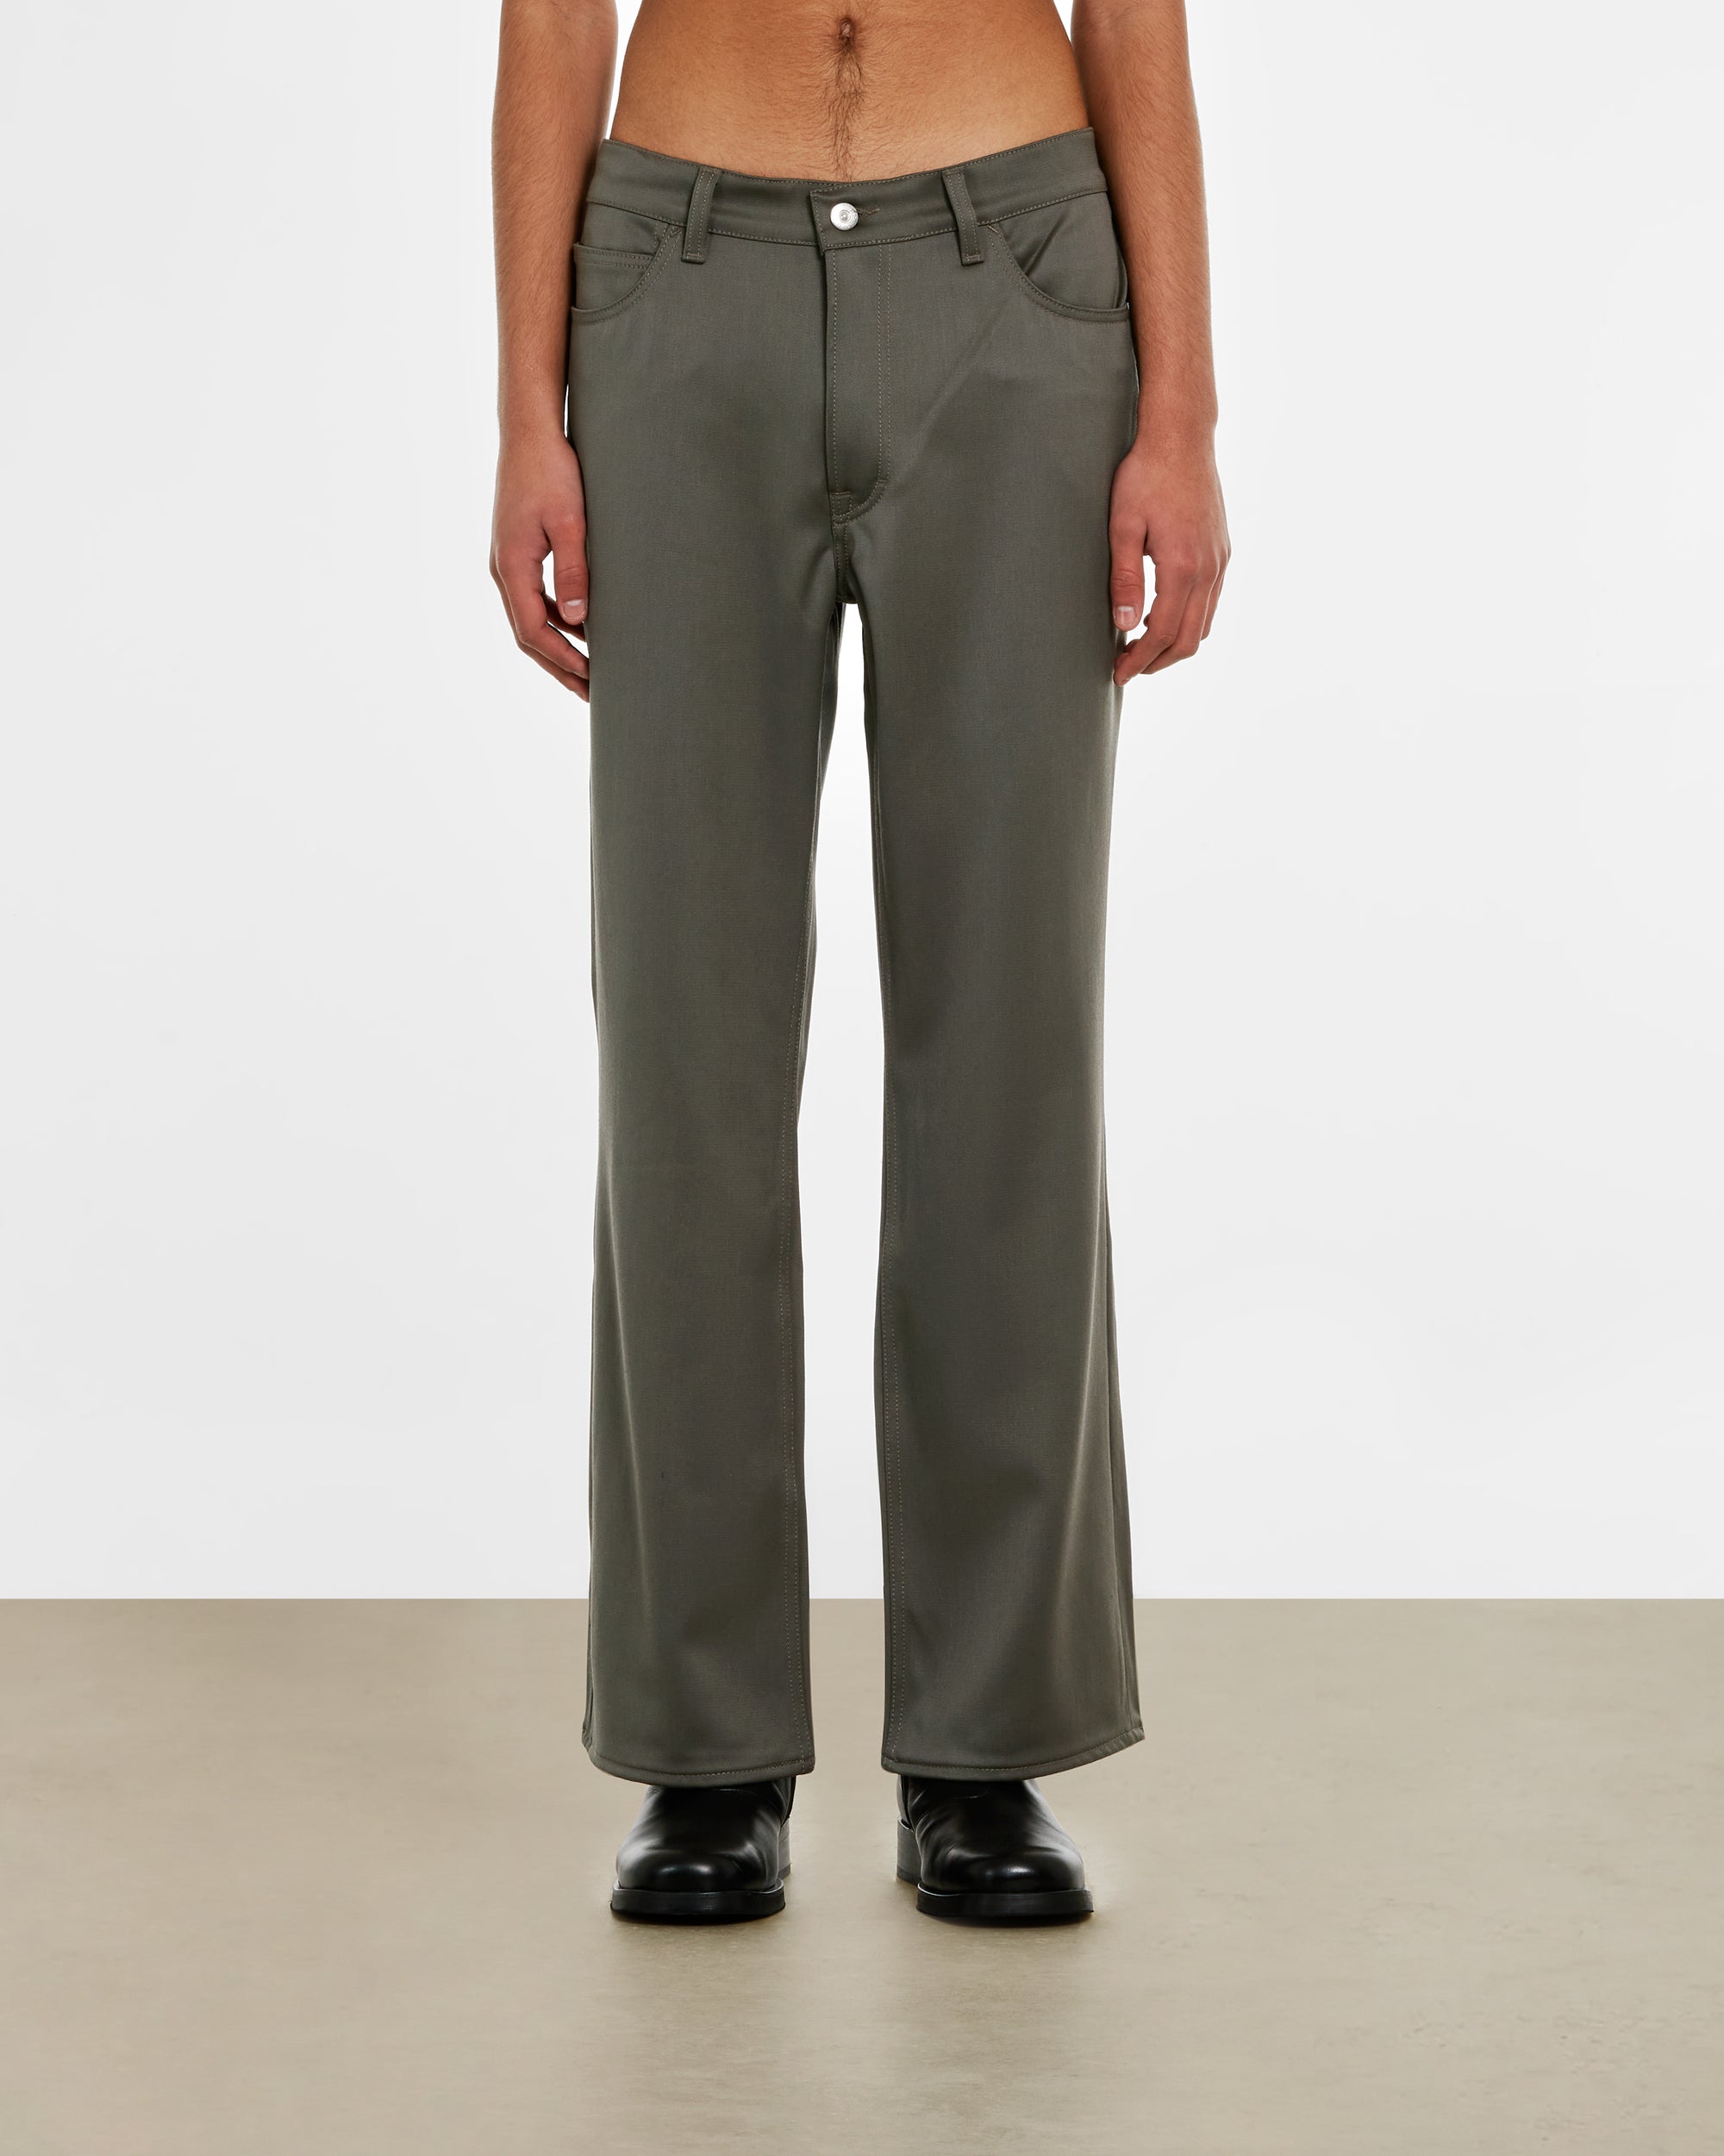 Our Legacy - Men’s 70S Cut Trousers - (Grey) view 3